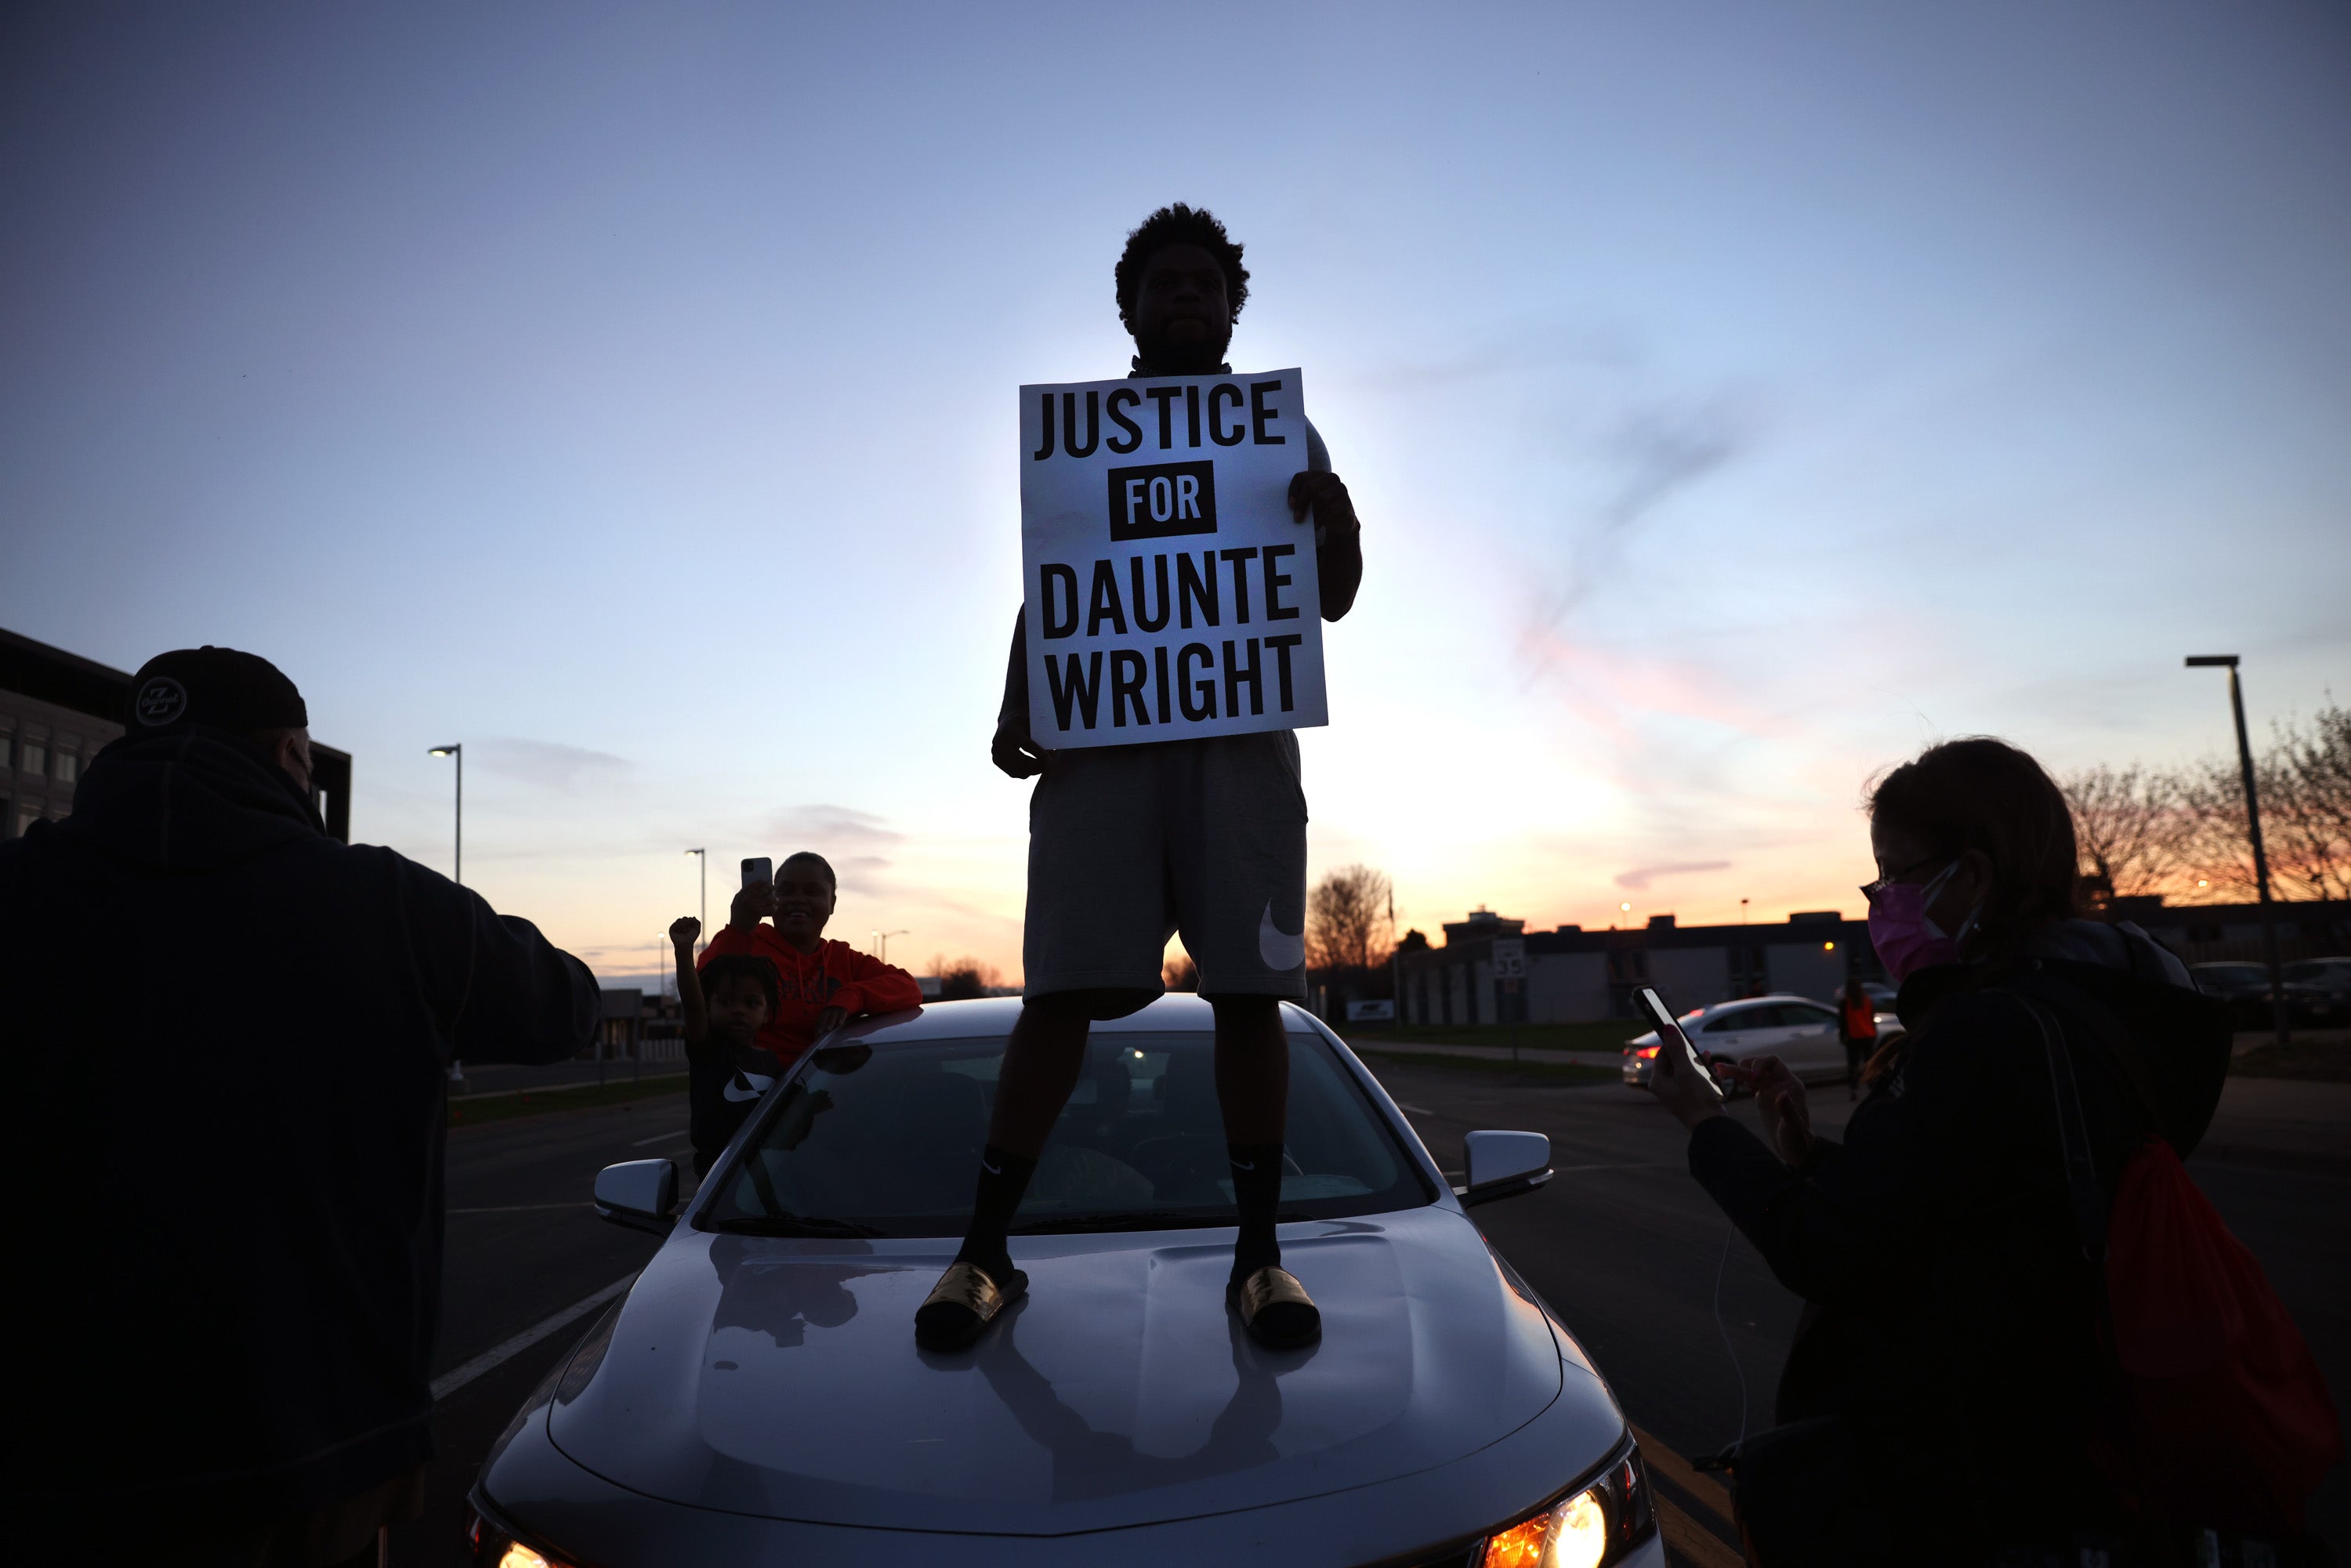 Protest near the Brooklyn Center police station on 16 April in Minnesota in the wake of the fatal shooting of 20-year-old Daunte Wright by Brooklyn Center police officer